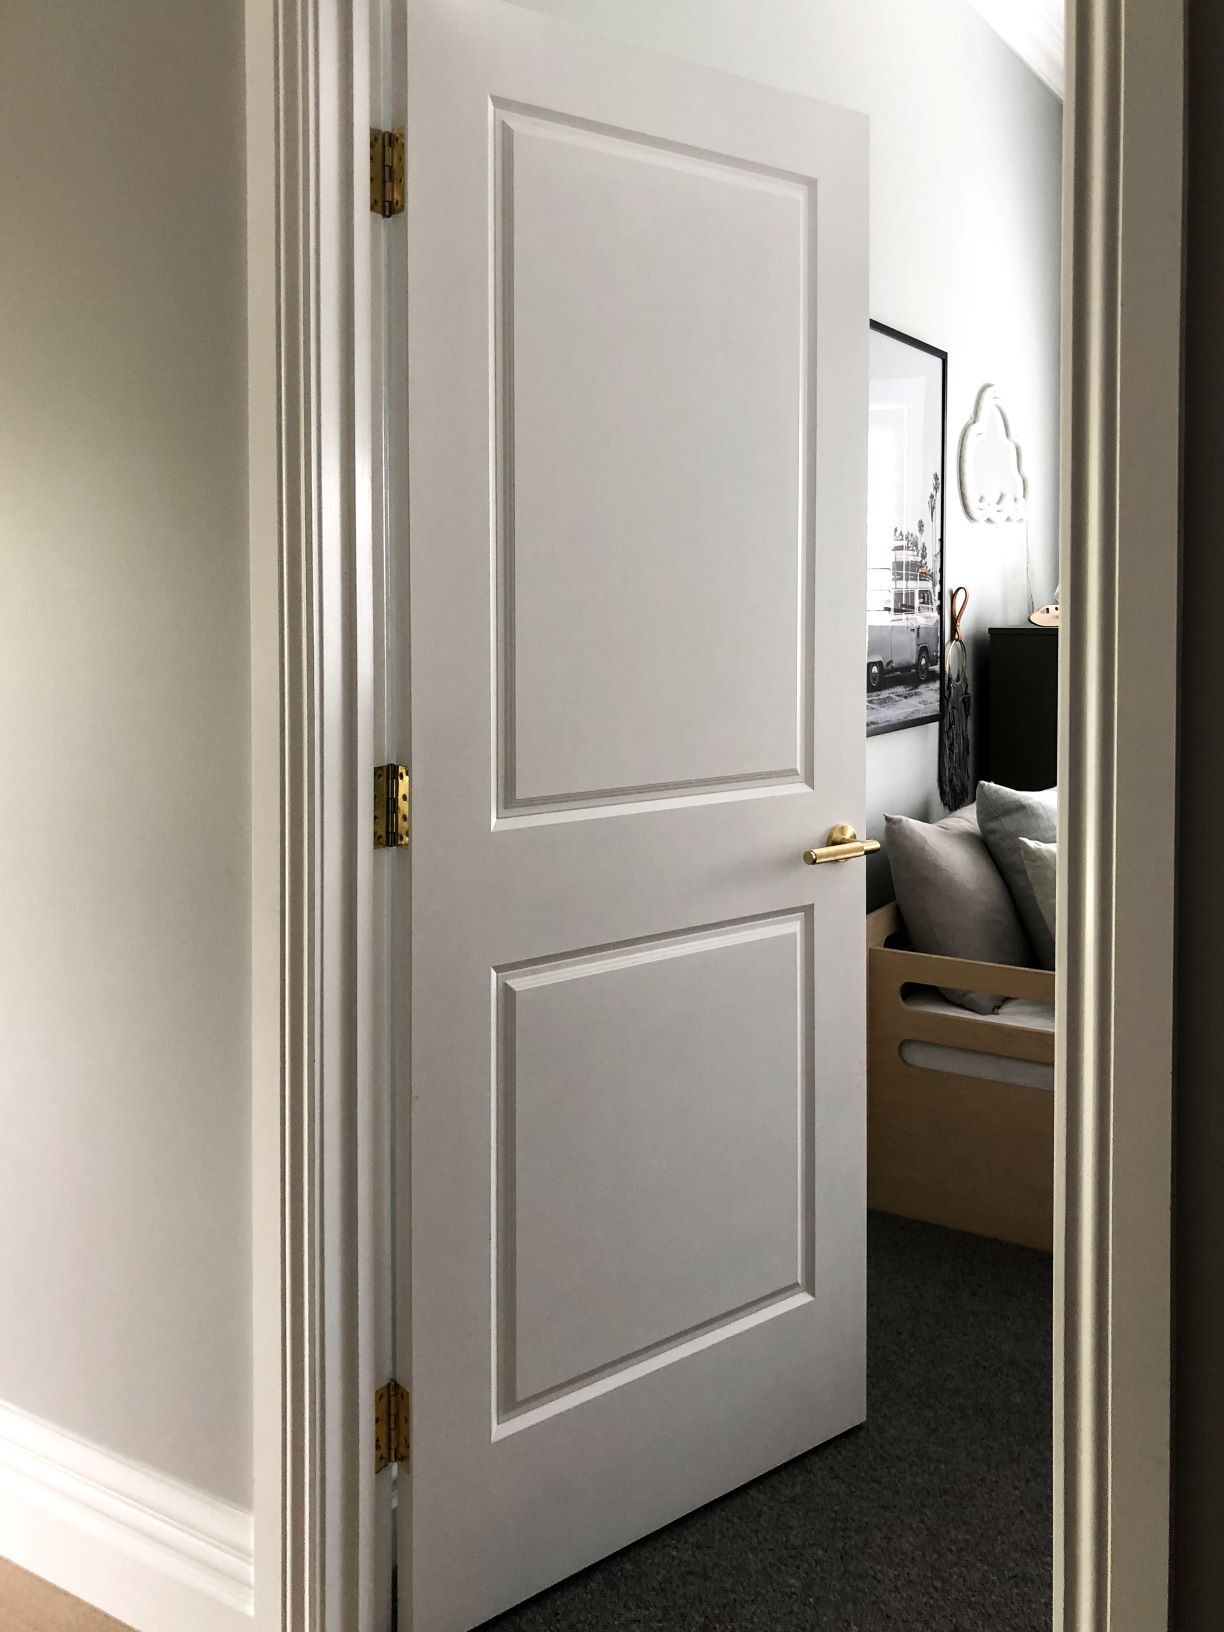 How to select the right interior door